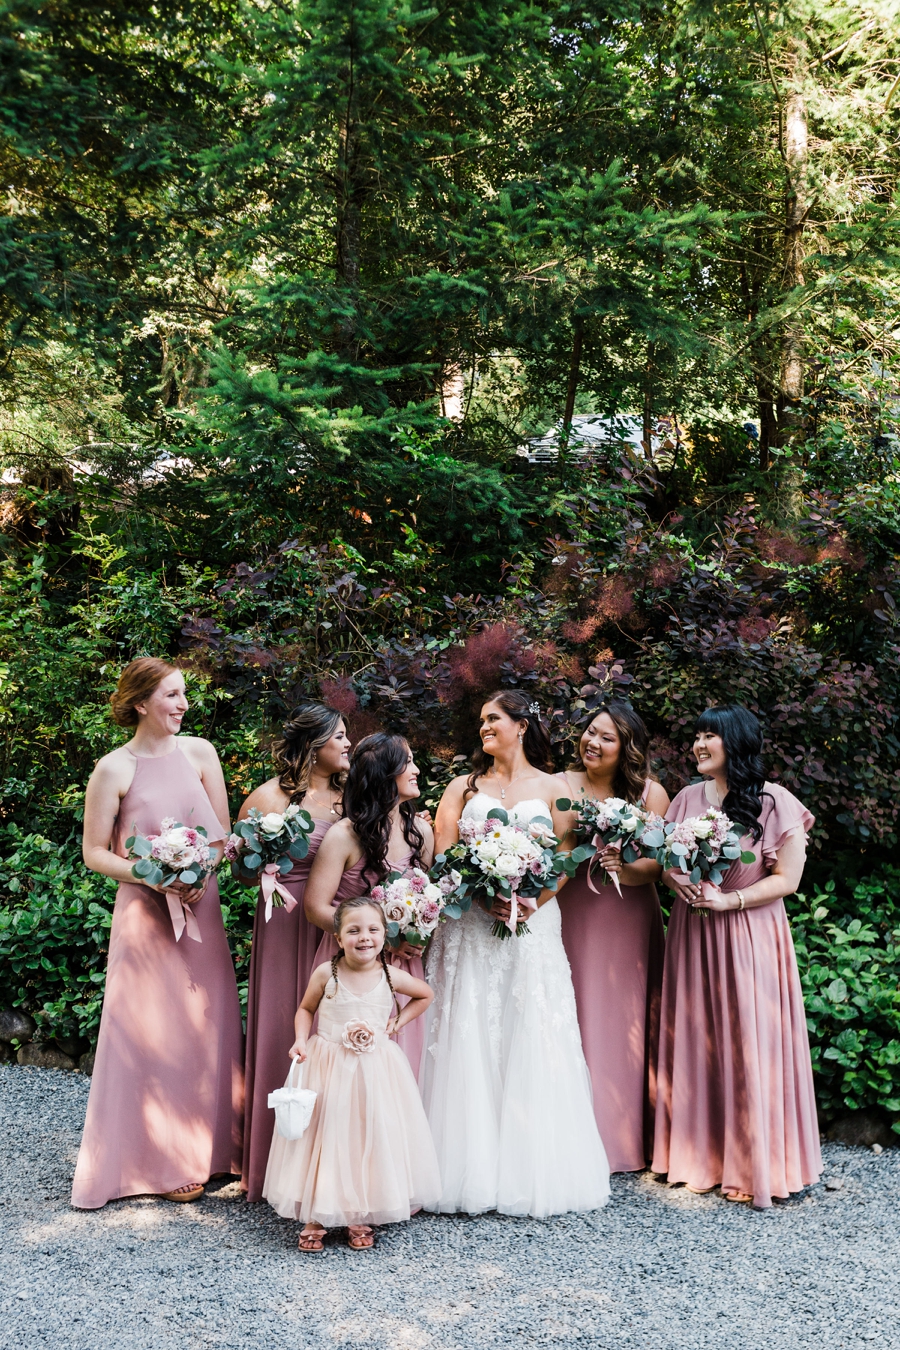 Bridesmaids wearing dusty rose dresses carrying cream and pink wedding bouquets by Seattle wedding photographer Amy Galbraith